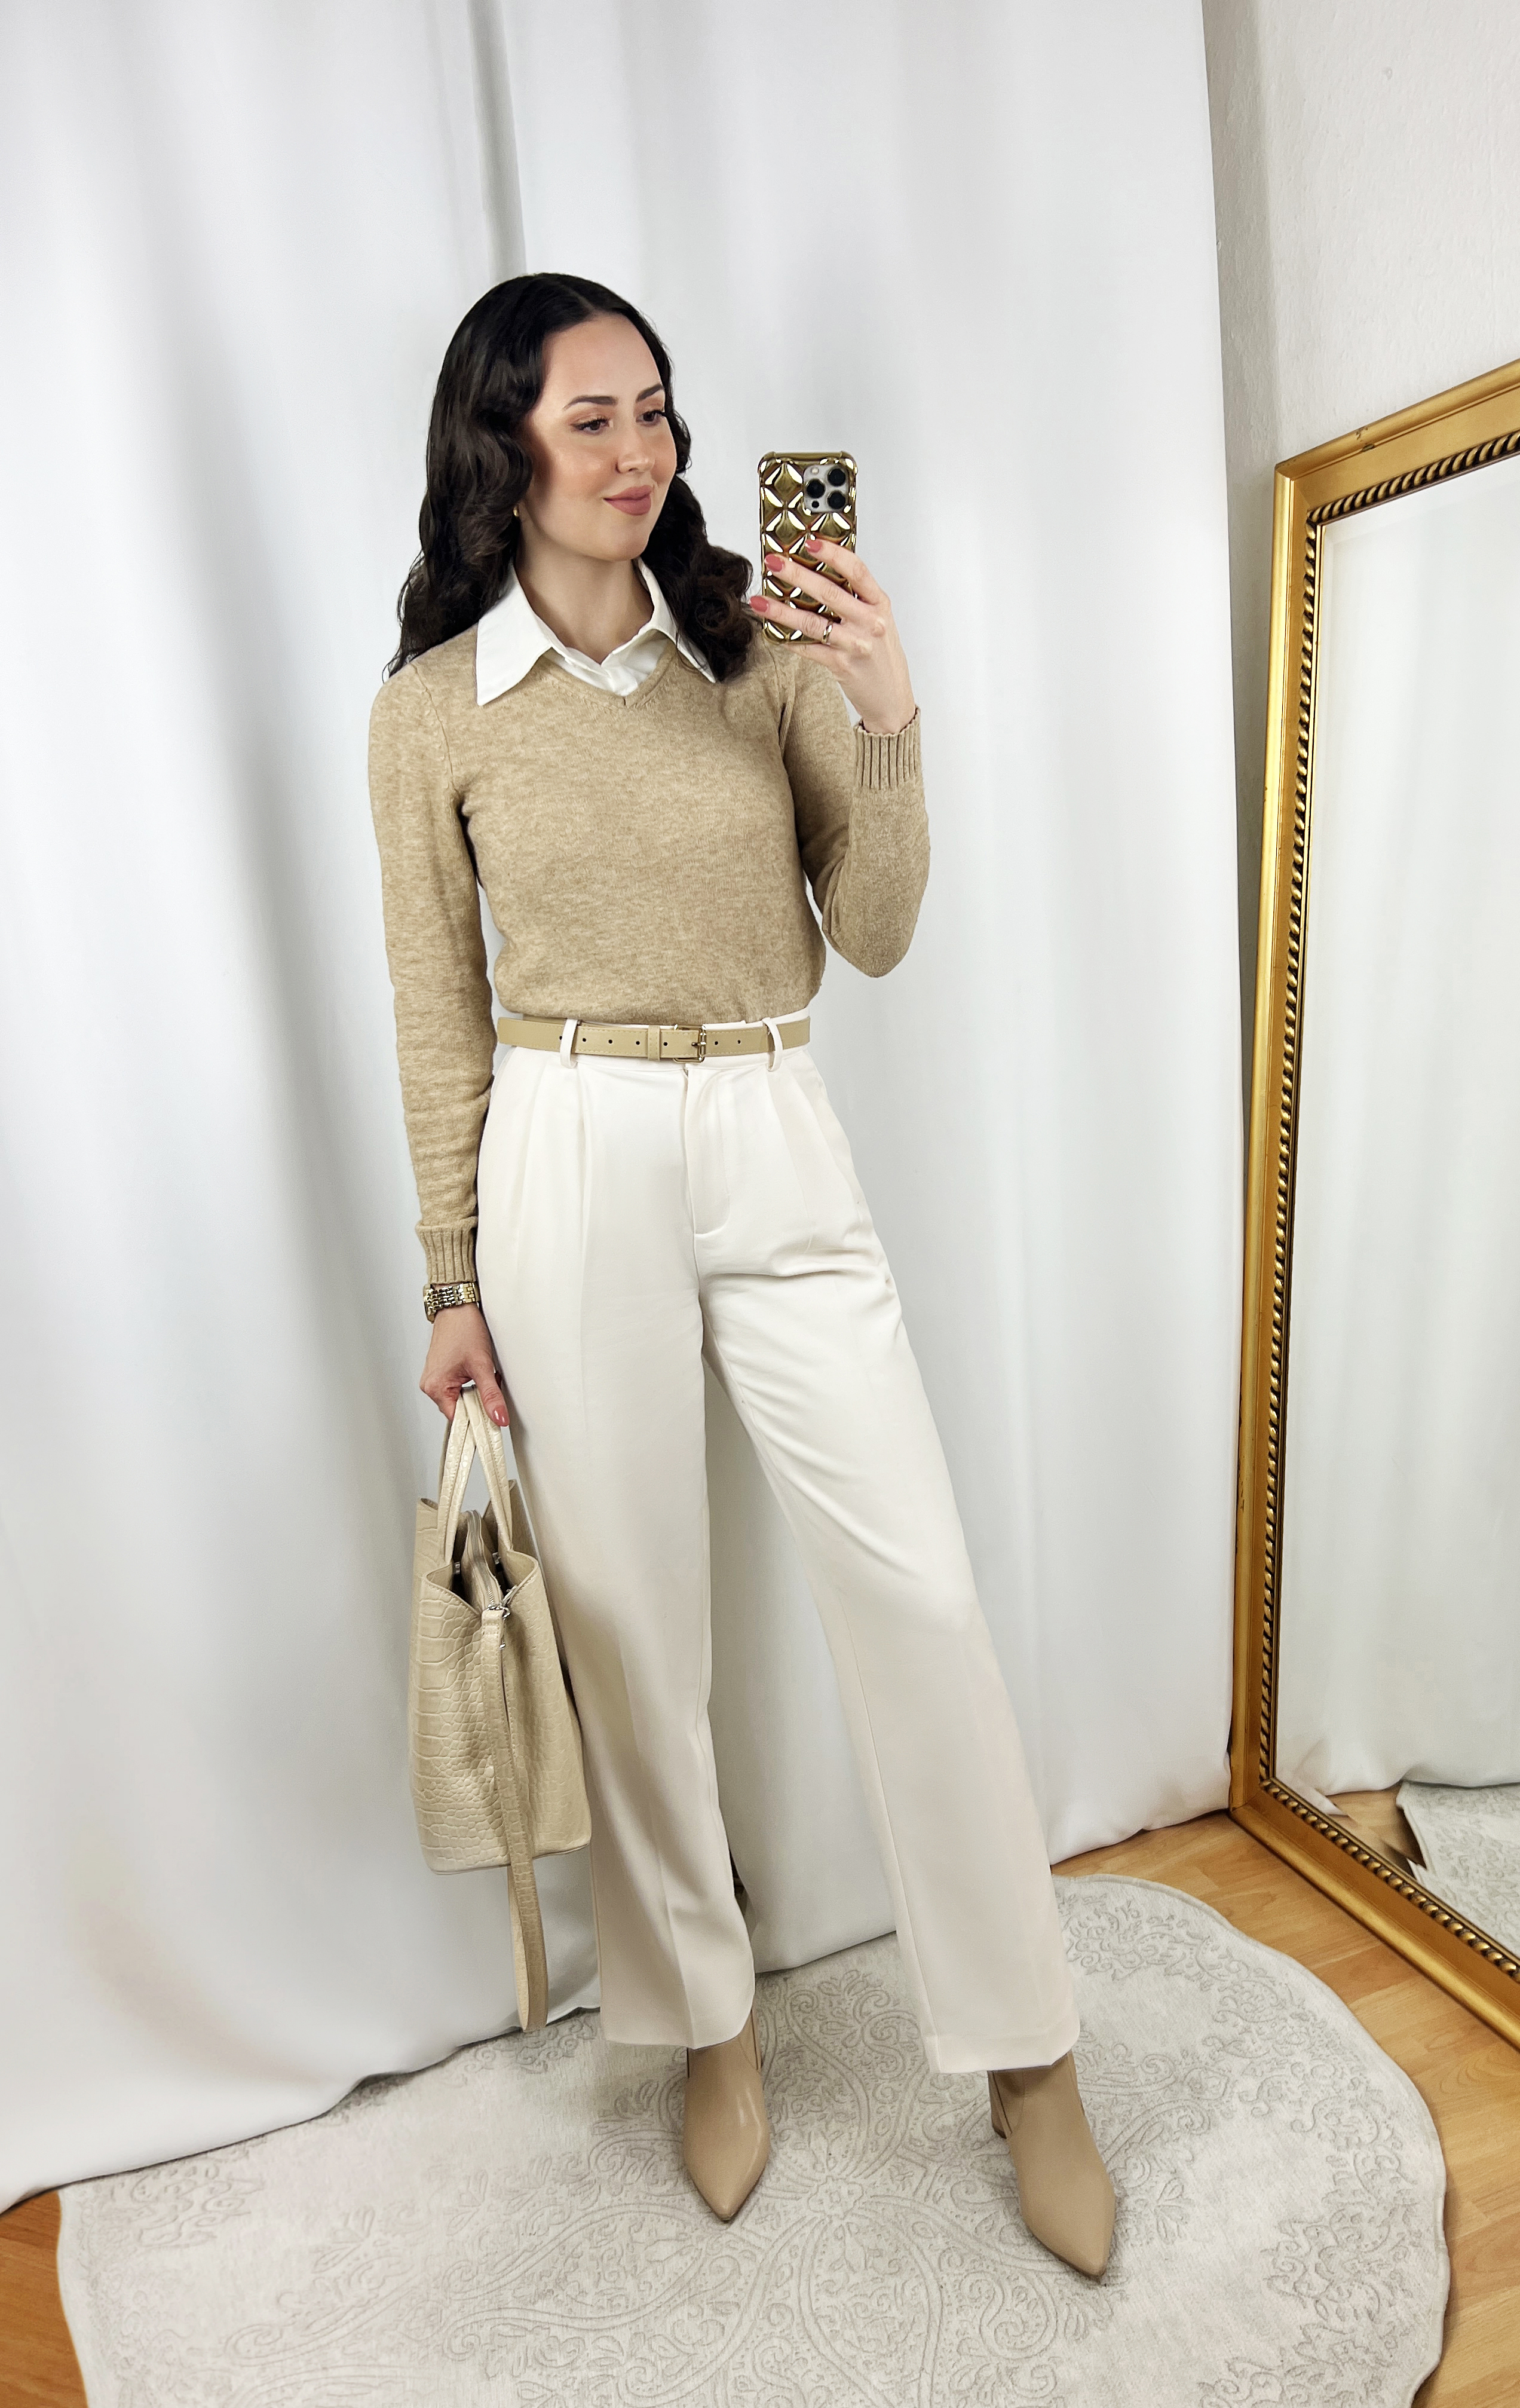 Beige Sweater with White Collar Outfit